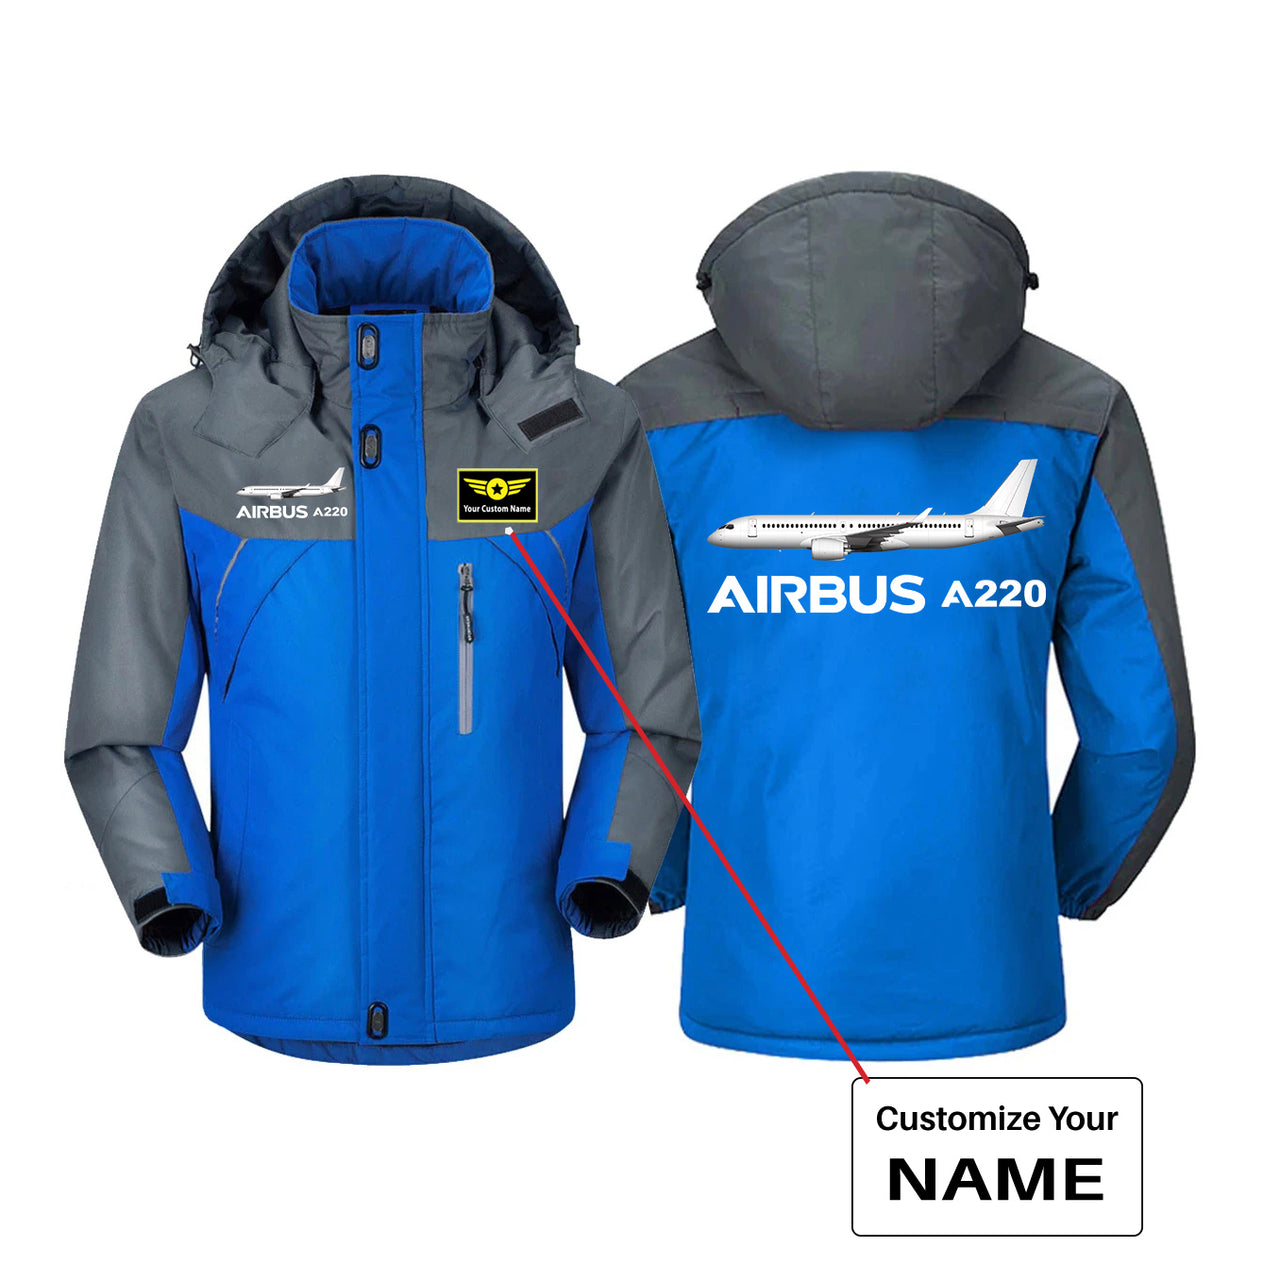 The Airbus A220 Designed Thick Winter Jackets